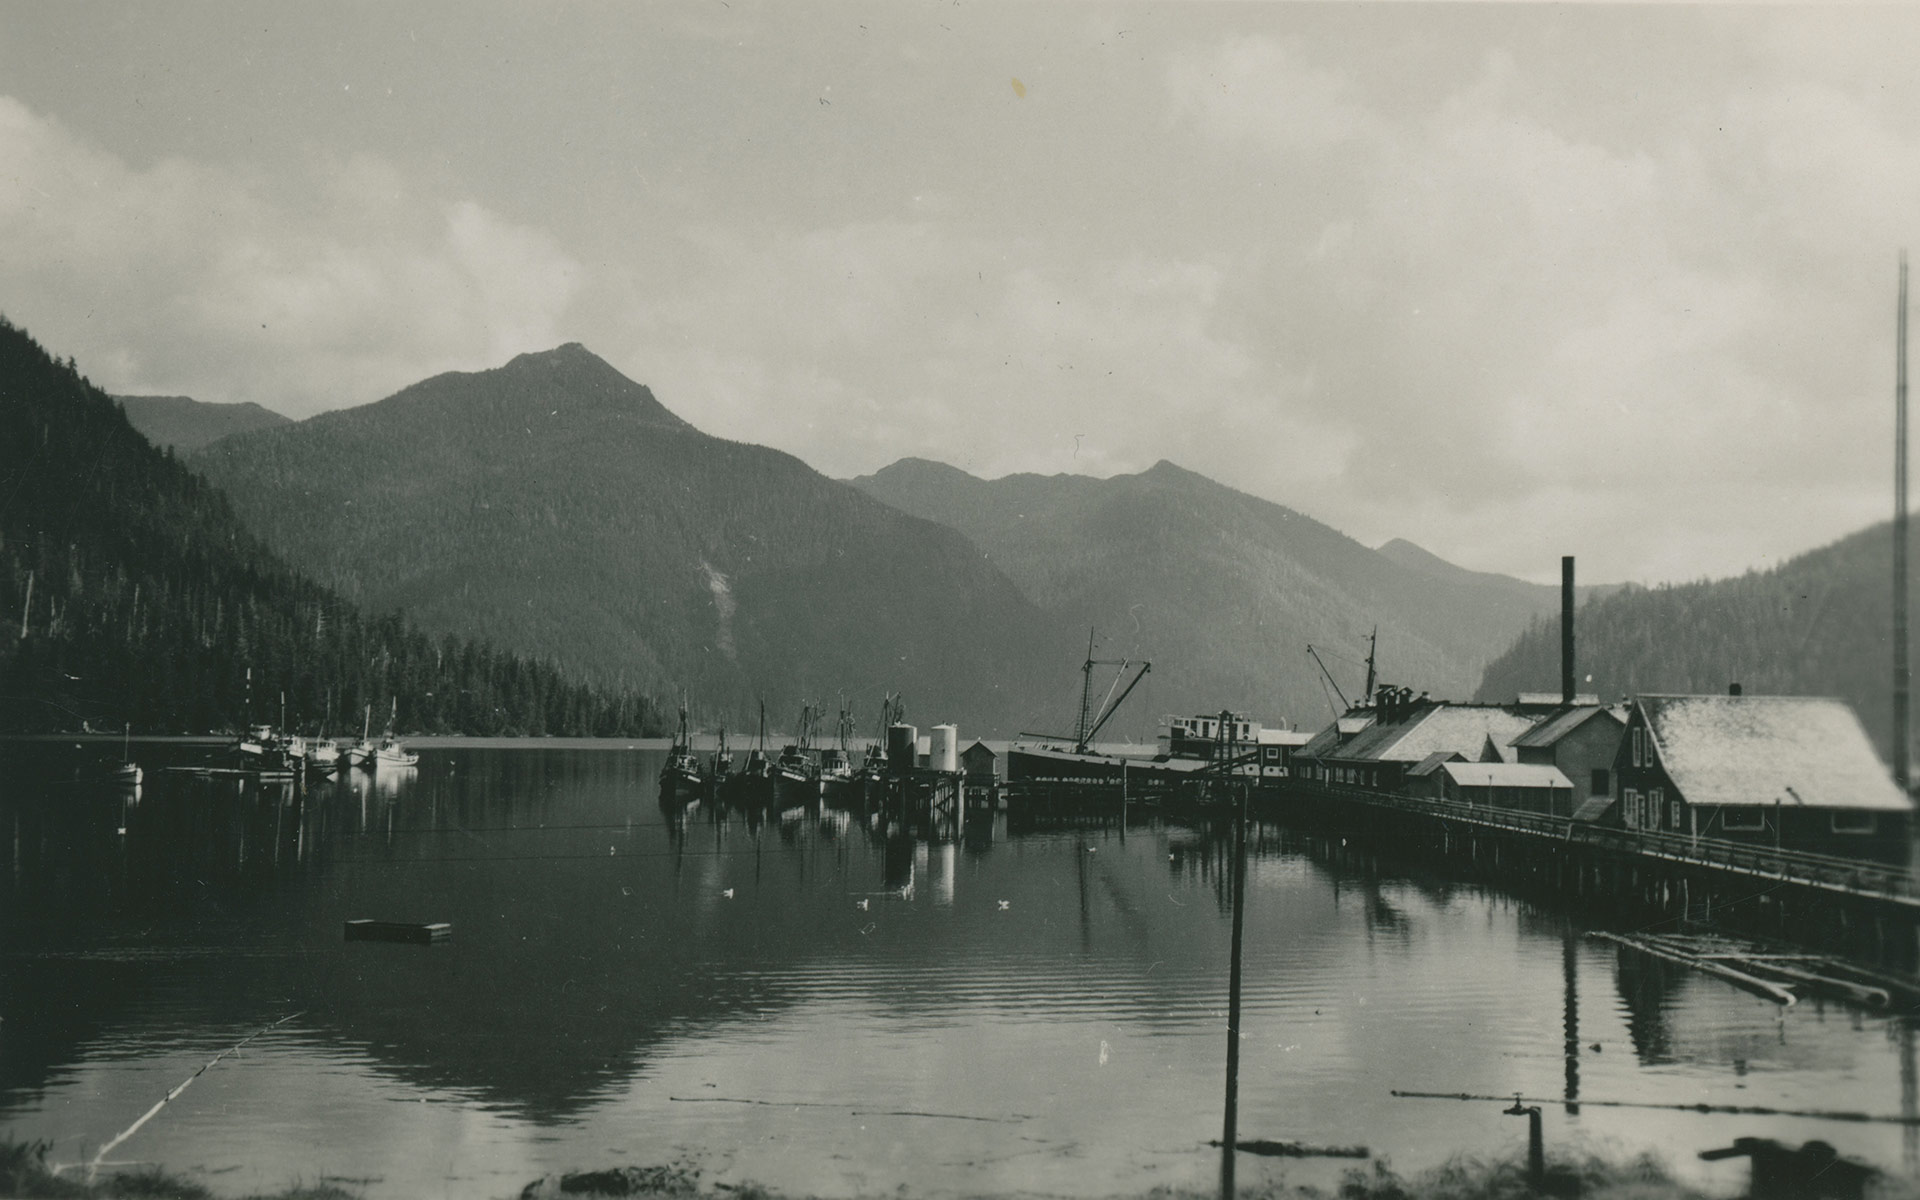 Lagoon Bay Cannery dock with mountains in the background.